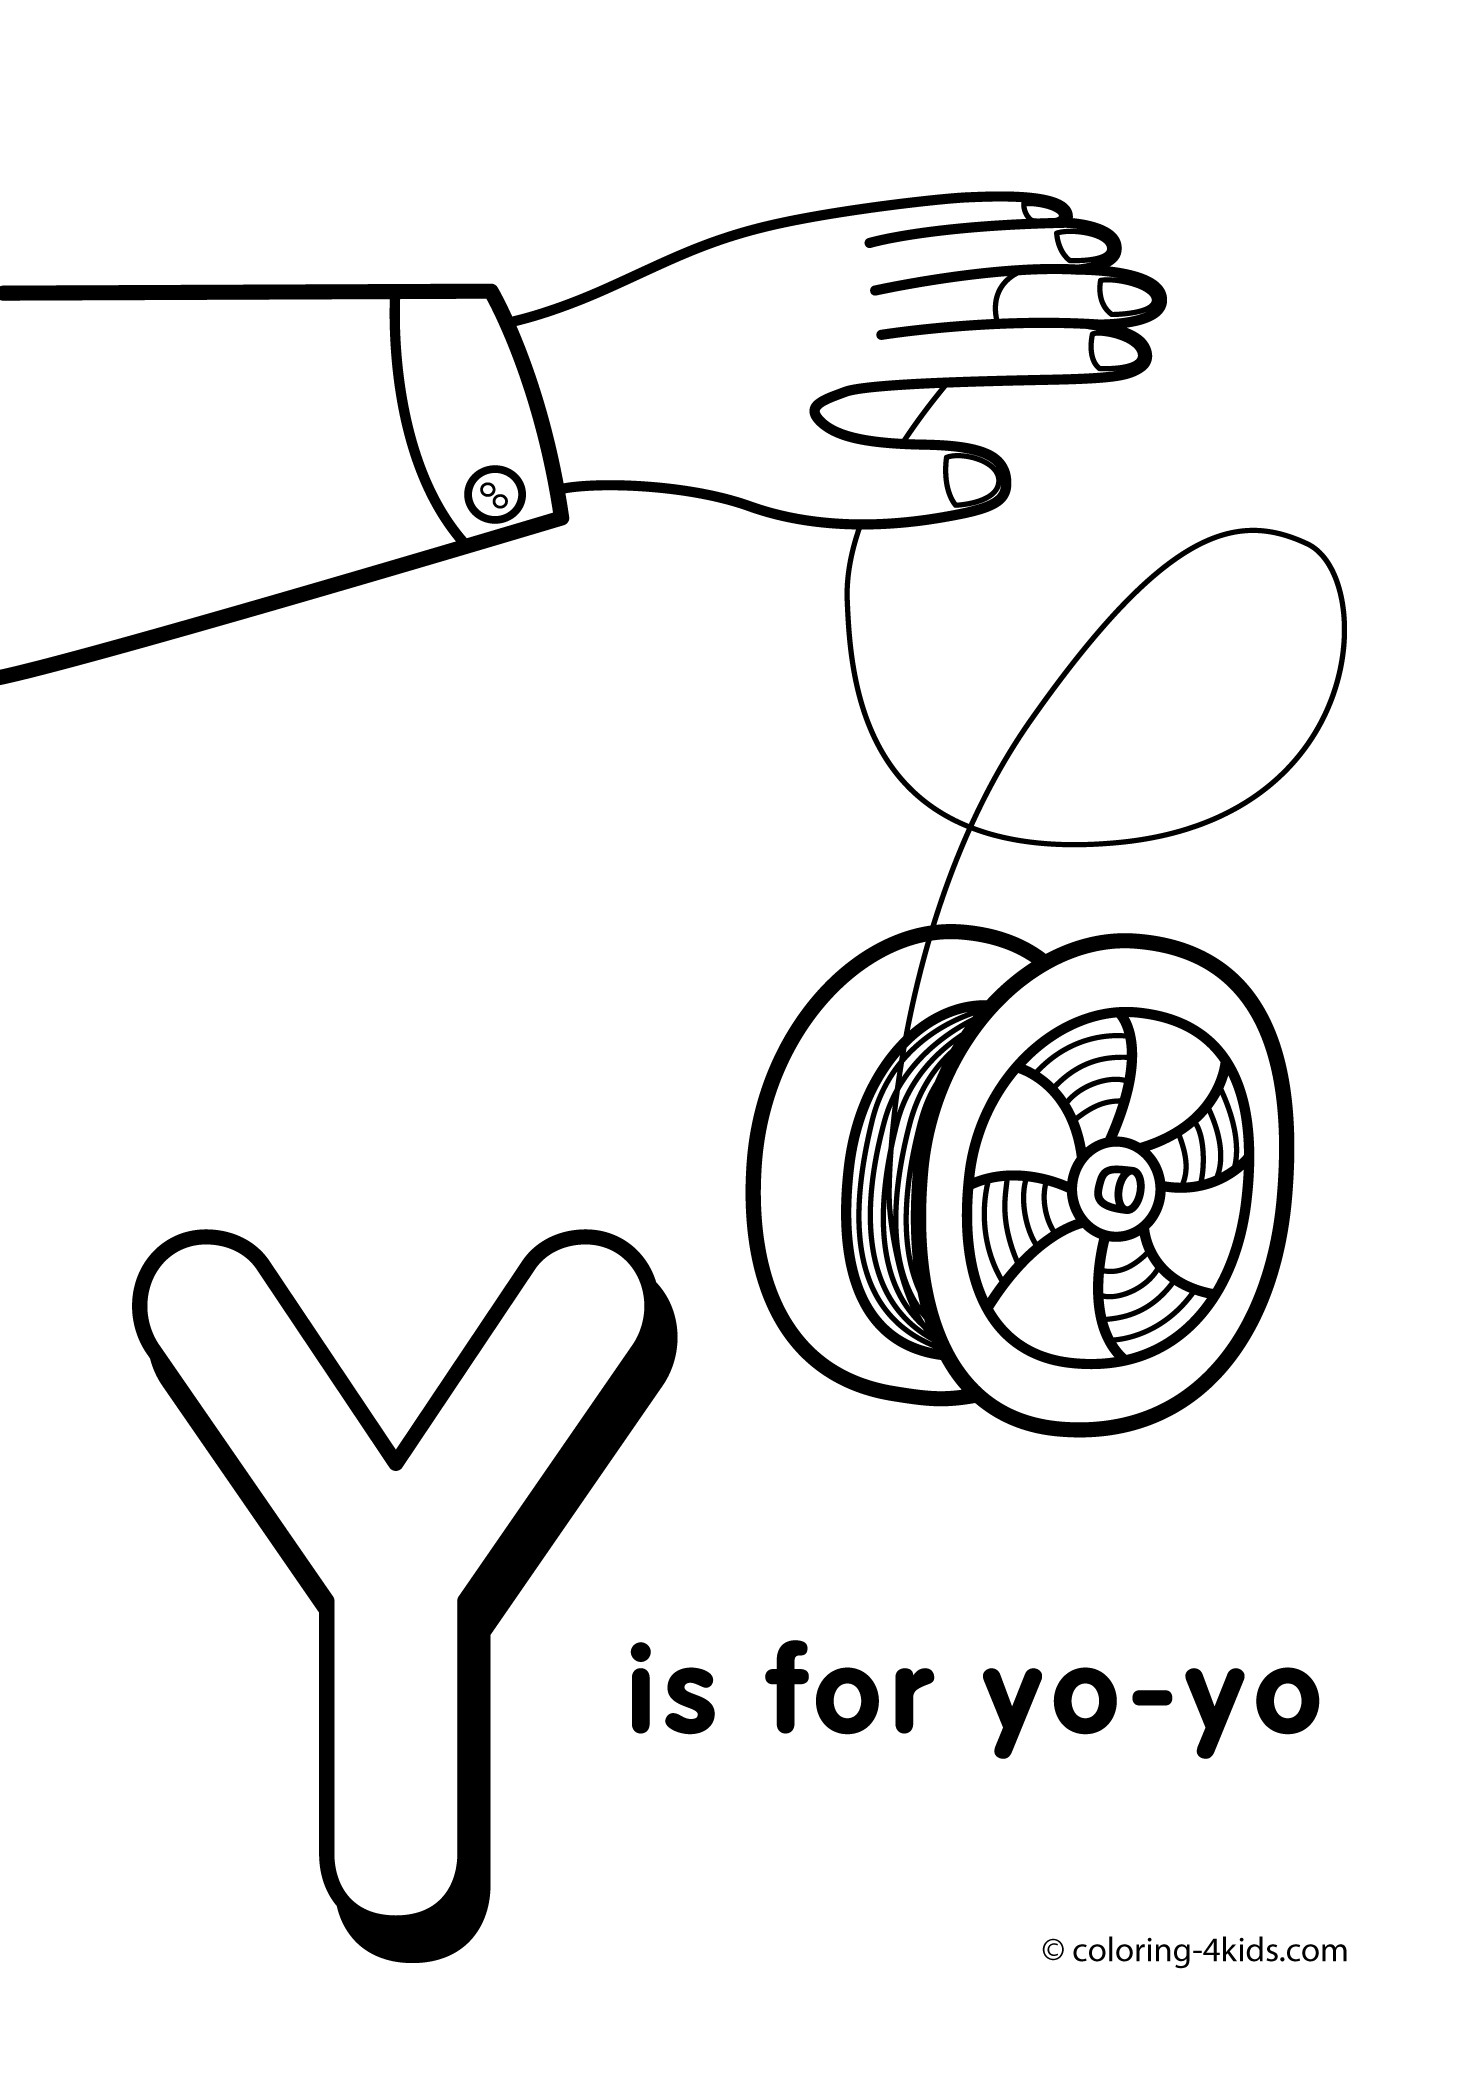 Letter Y Coloring Pages
 The Letter Y Coloring Pages Coloring Home